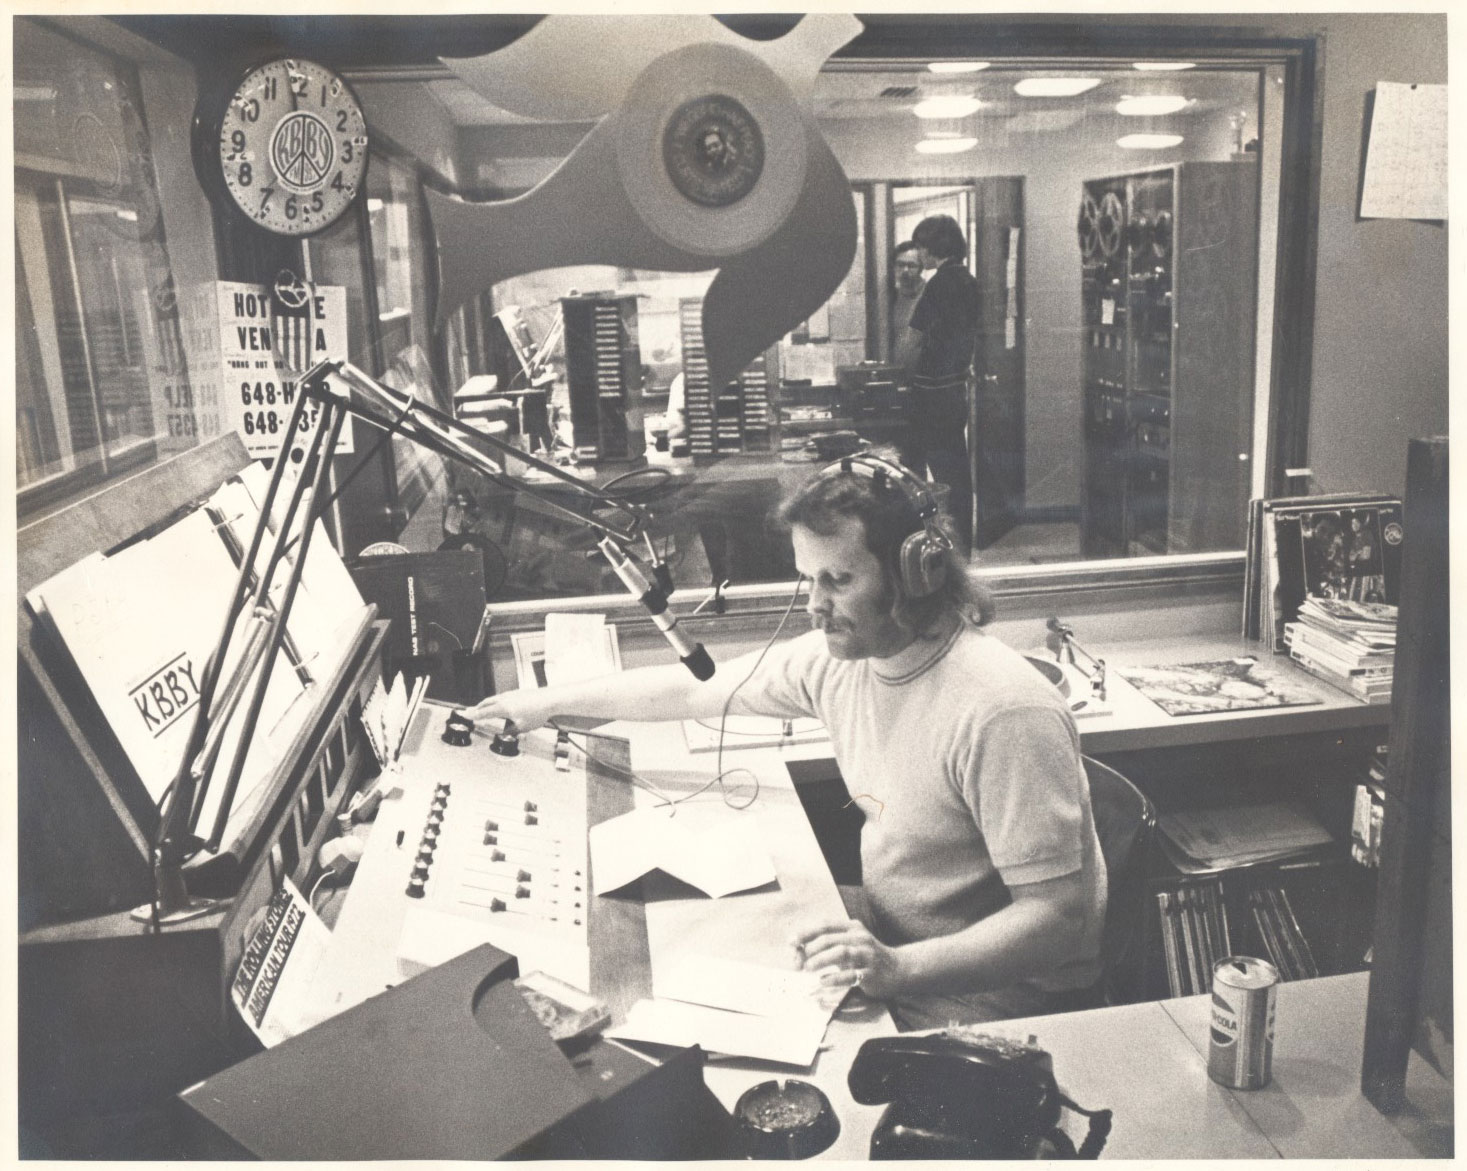 A young Bill Bowker sits in a radio booth, cigarette in hand.